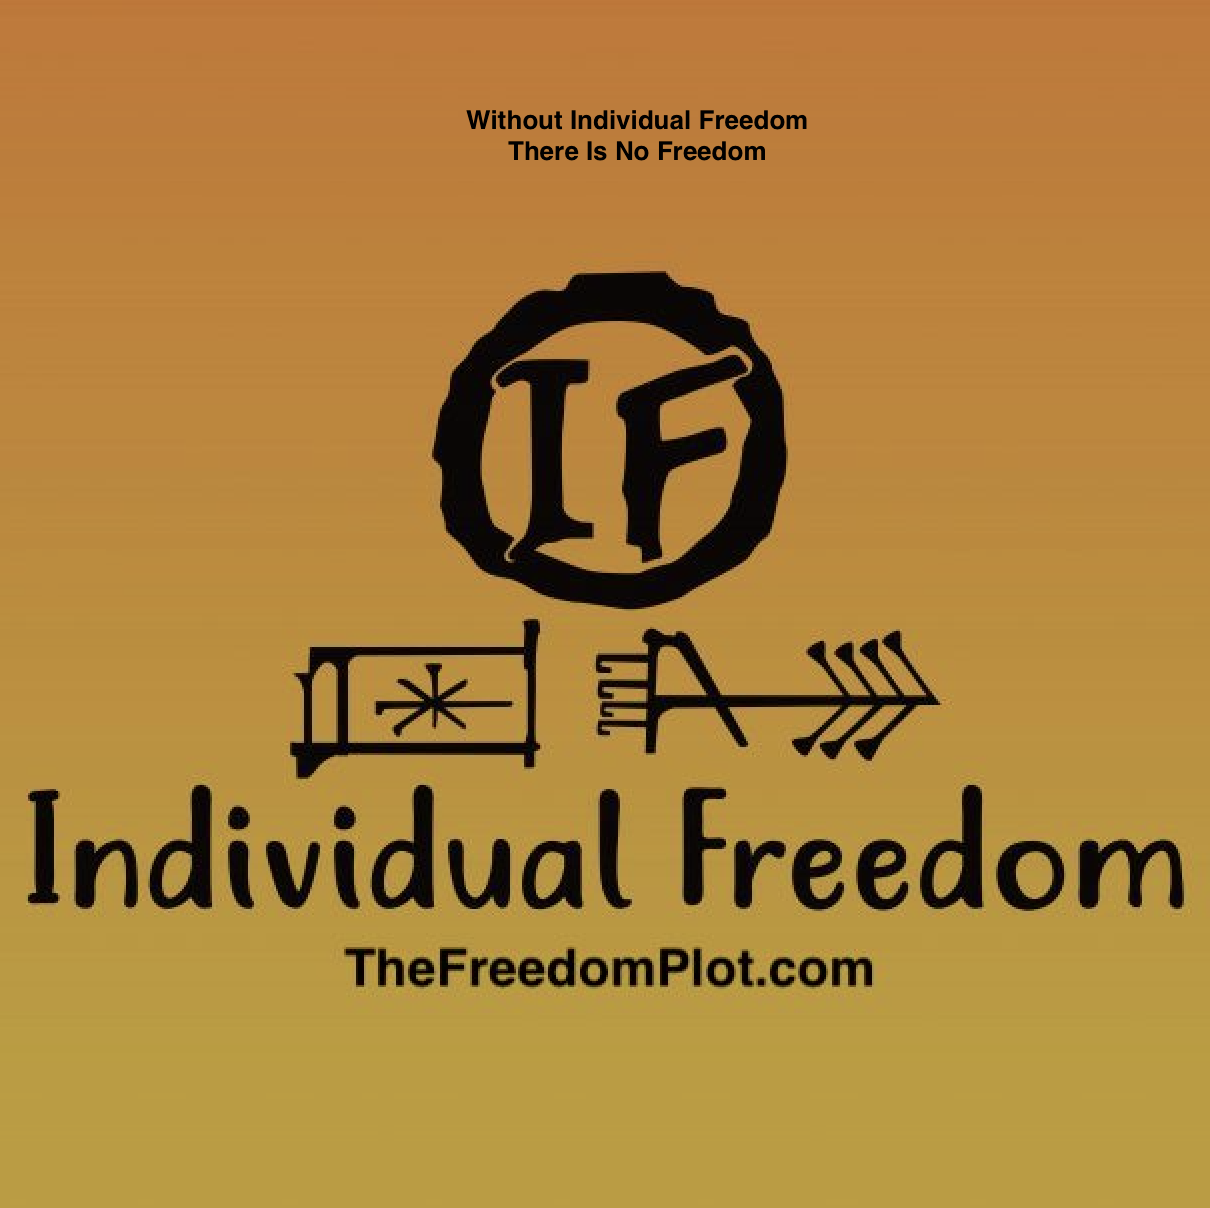 Refuse to Comply: Without Individual Freedom, There Is No Freedom